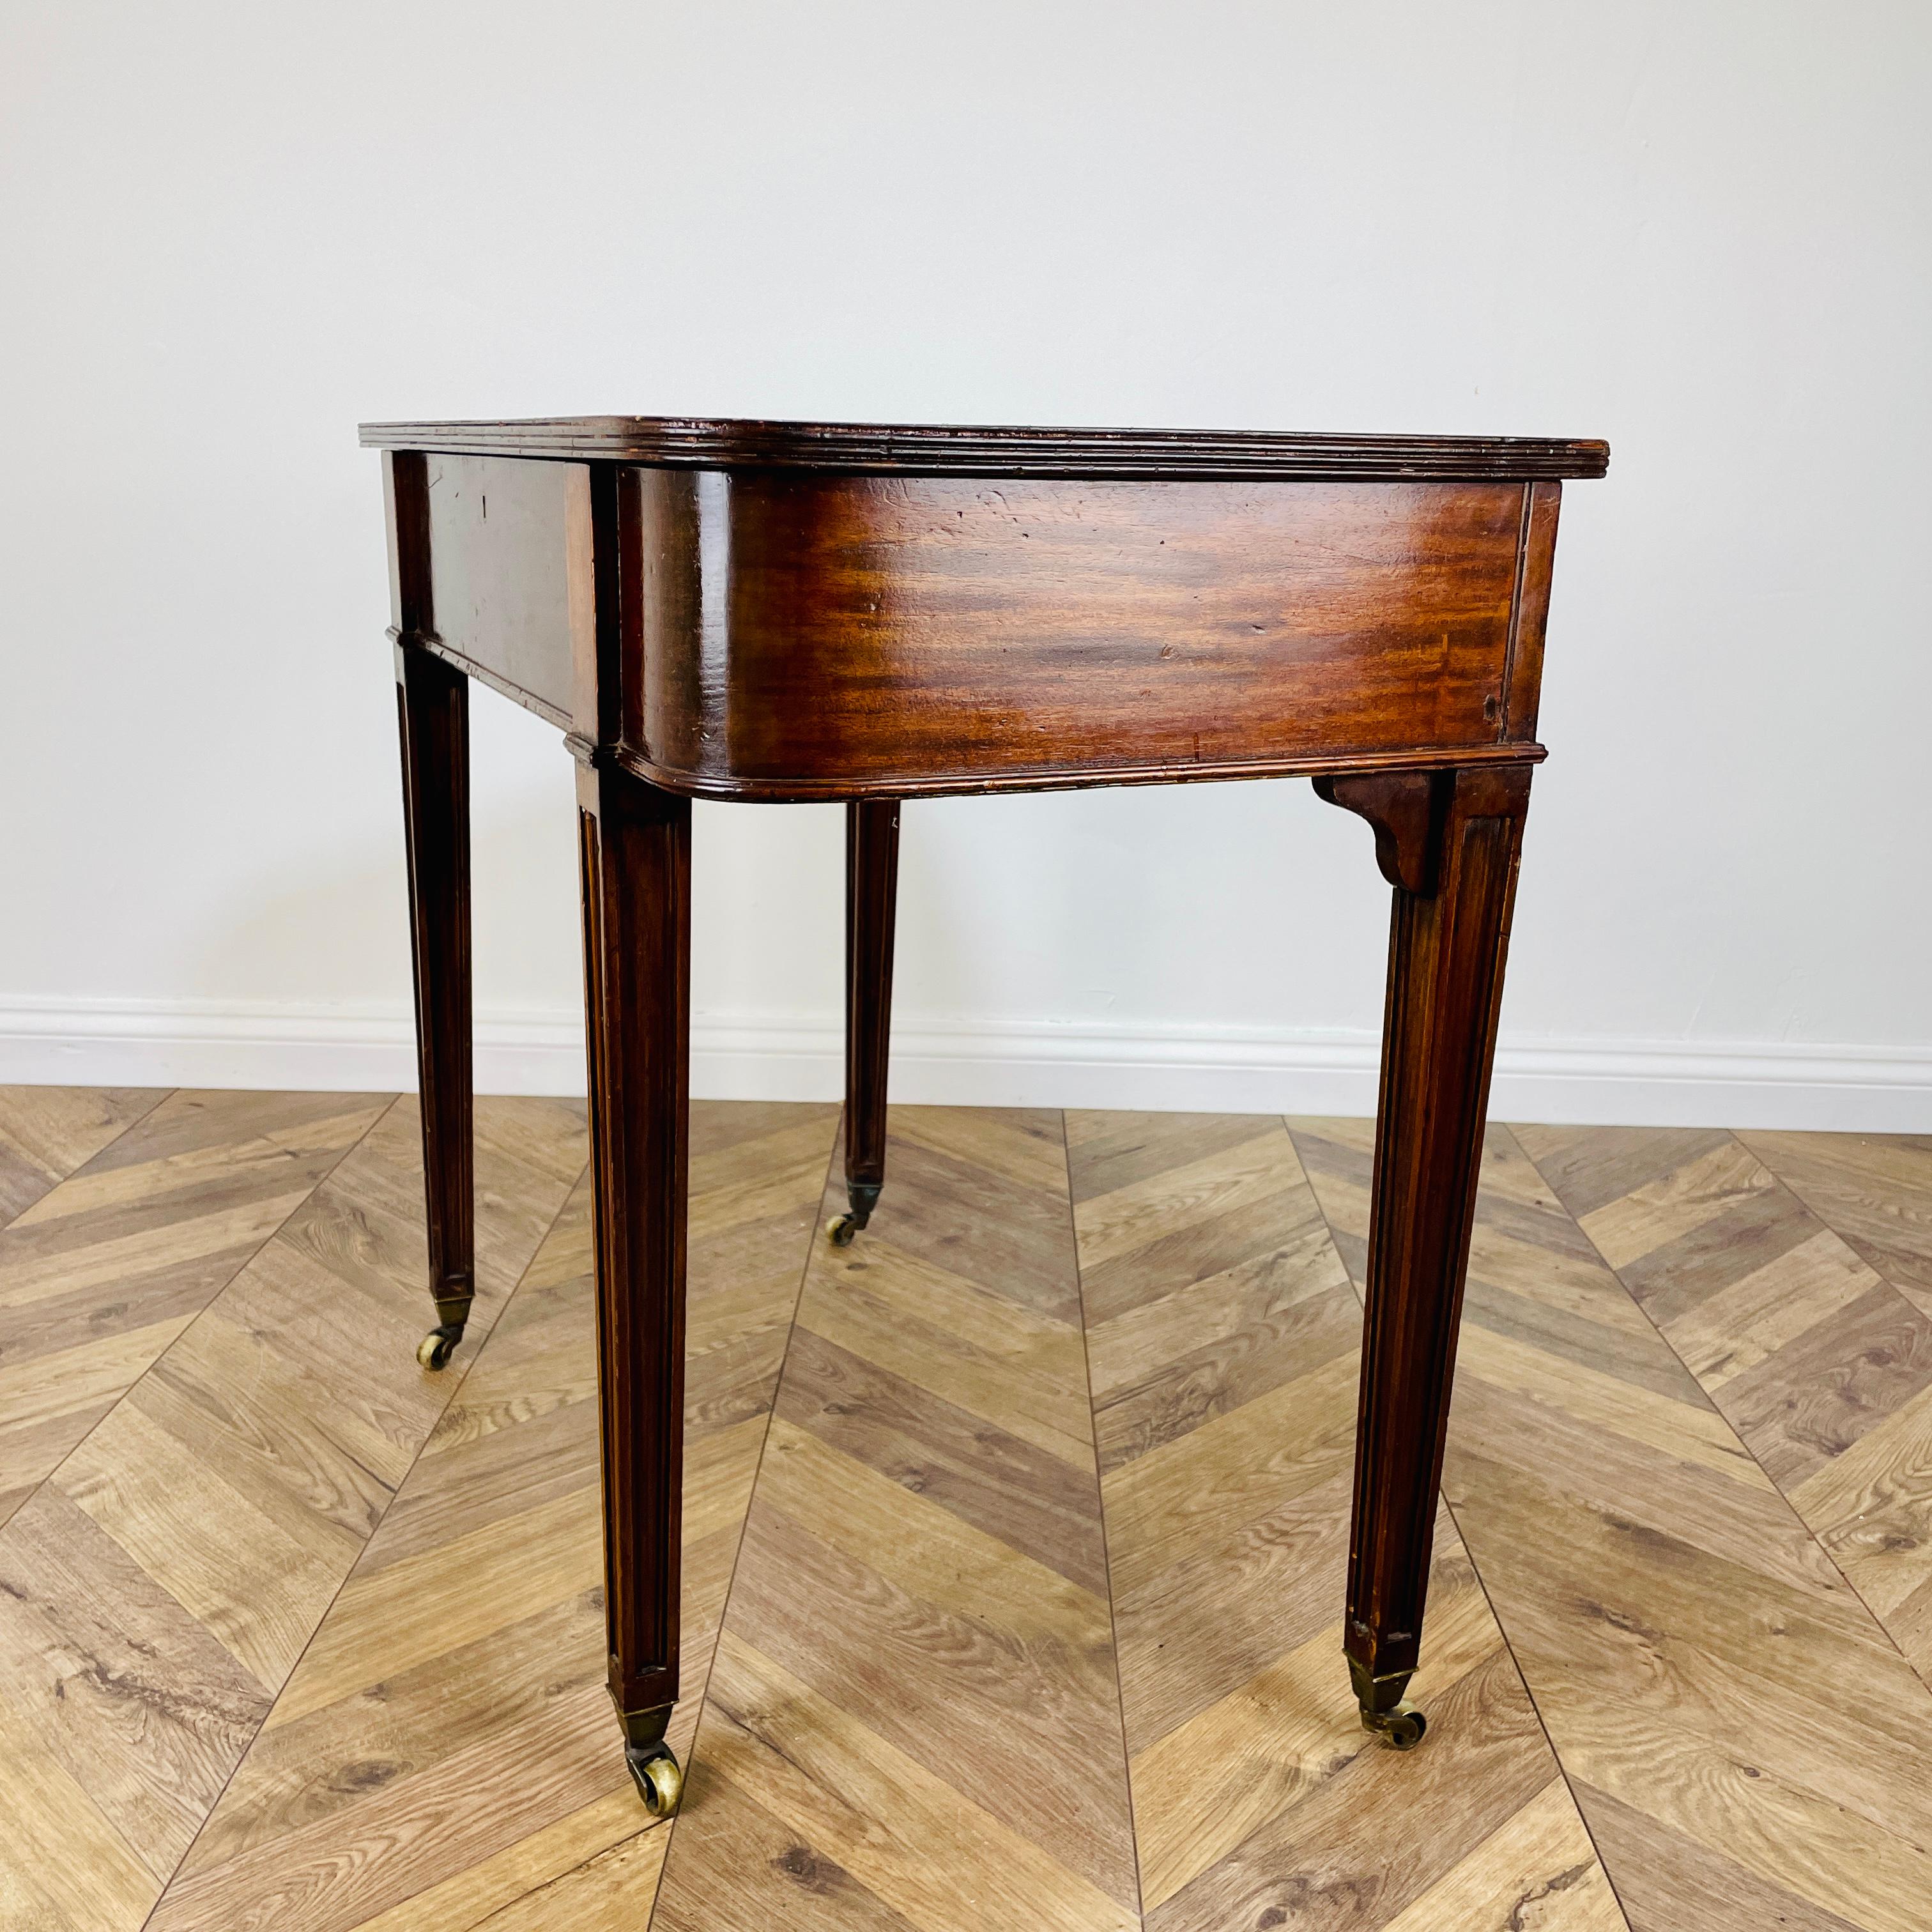 Antique English Side Table with Lift Lid Storage by Elkington + Co, 19th Century For Sale 9